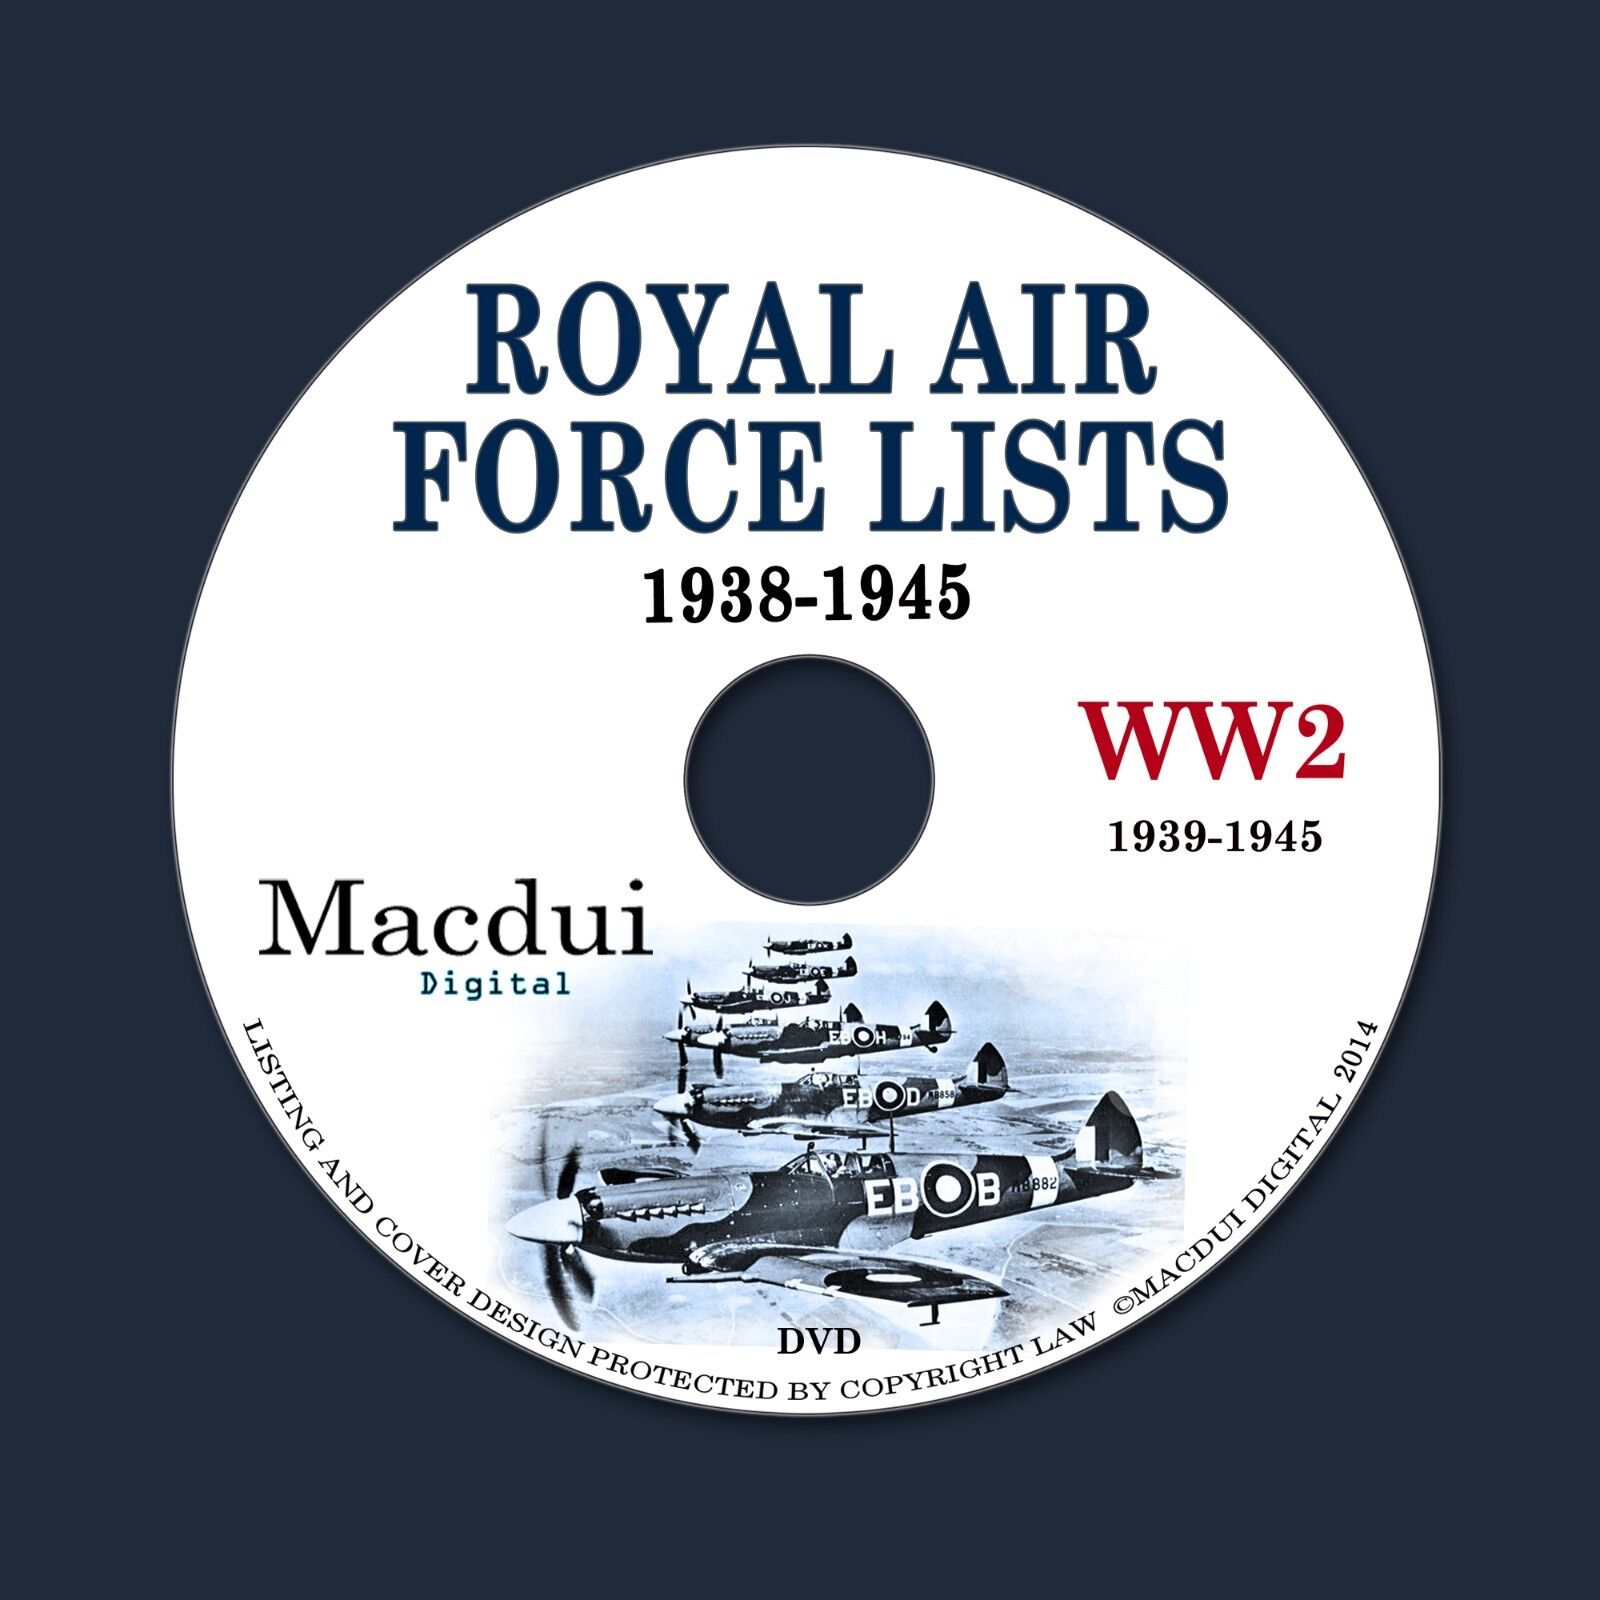 Royal Air Force Lists 1938-1945 – Vintage e-Books Collection 57 PDF on DVD WW2 